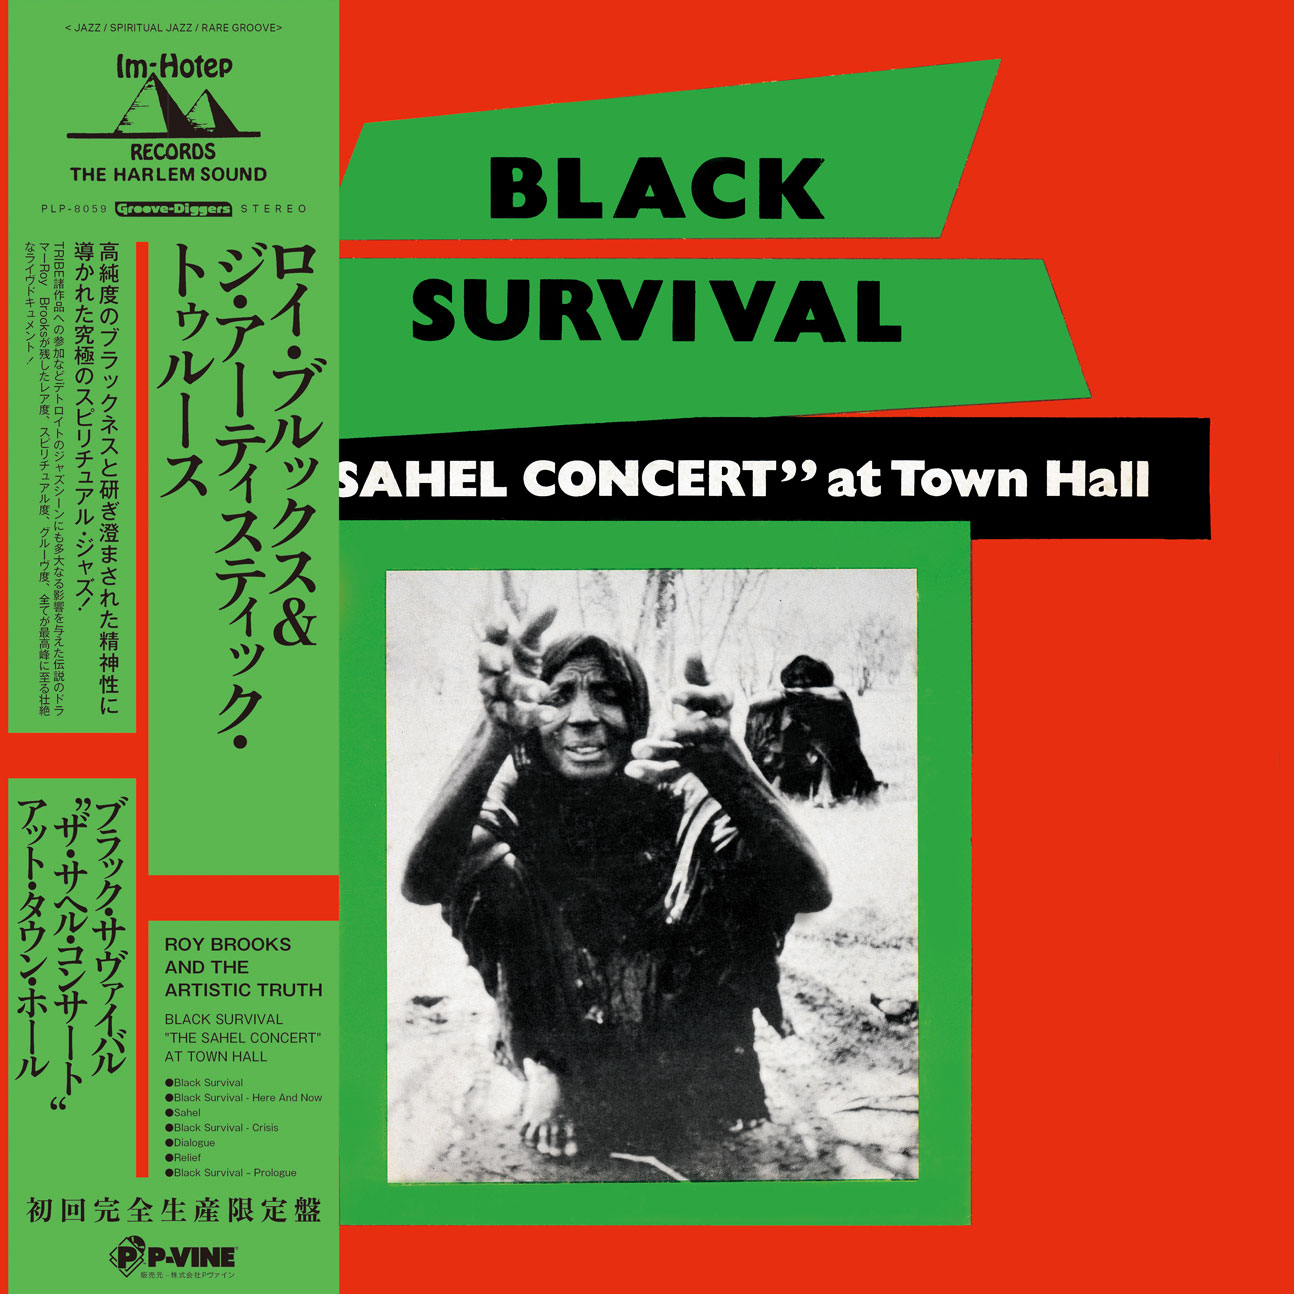 Black Survival - "The Sahel Concert" At Town Hall